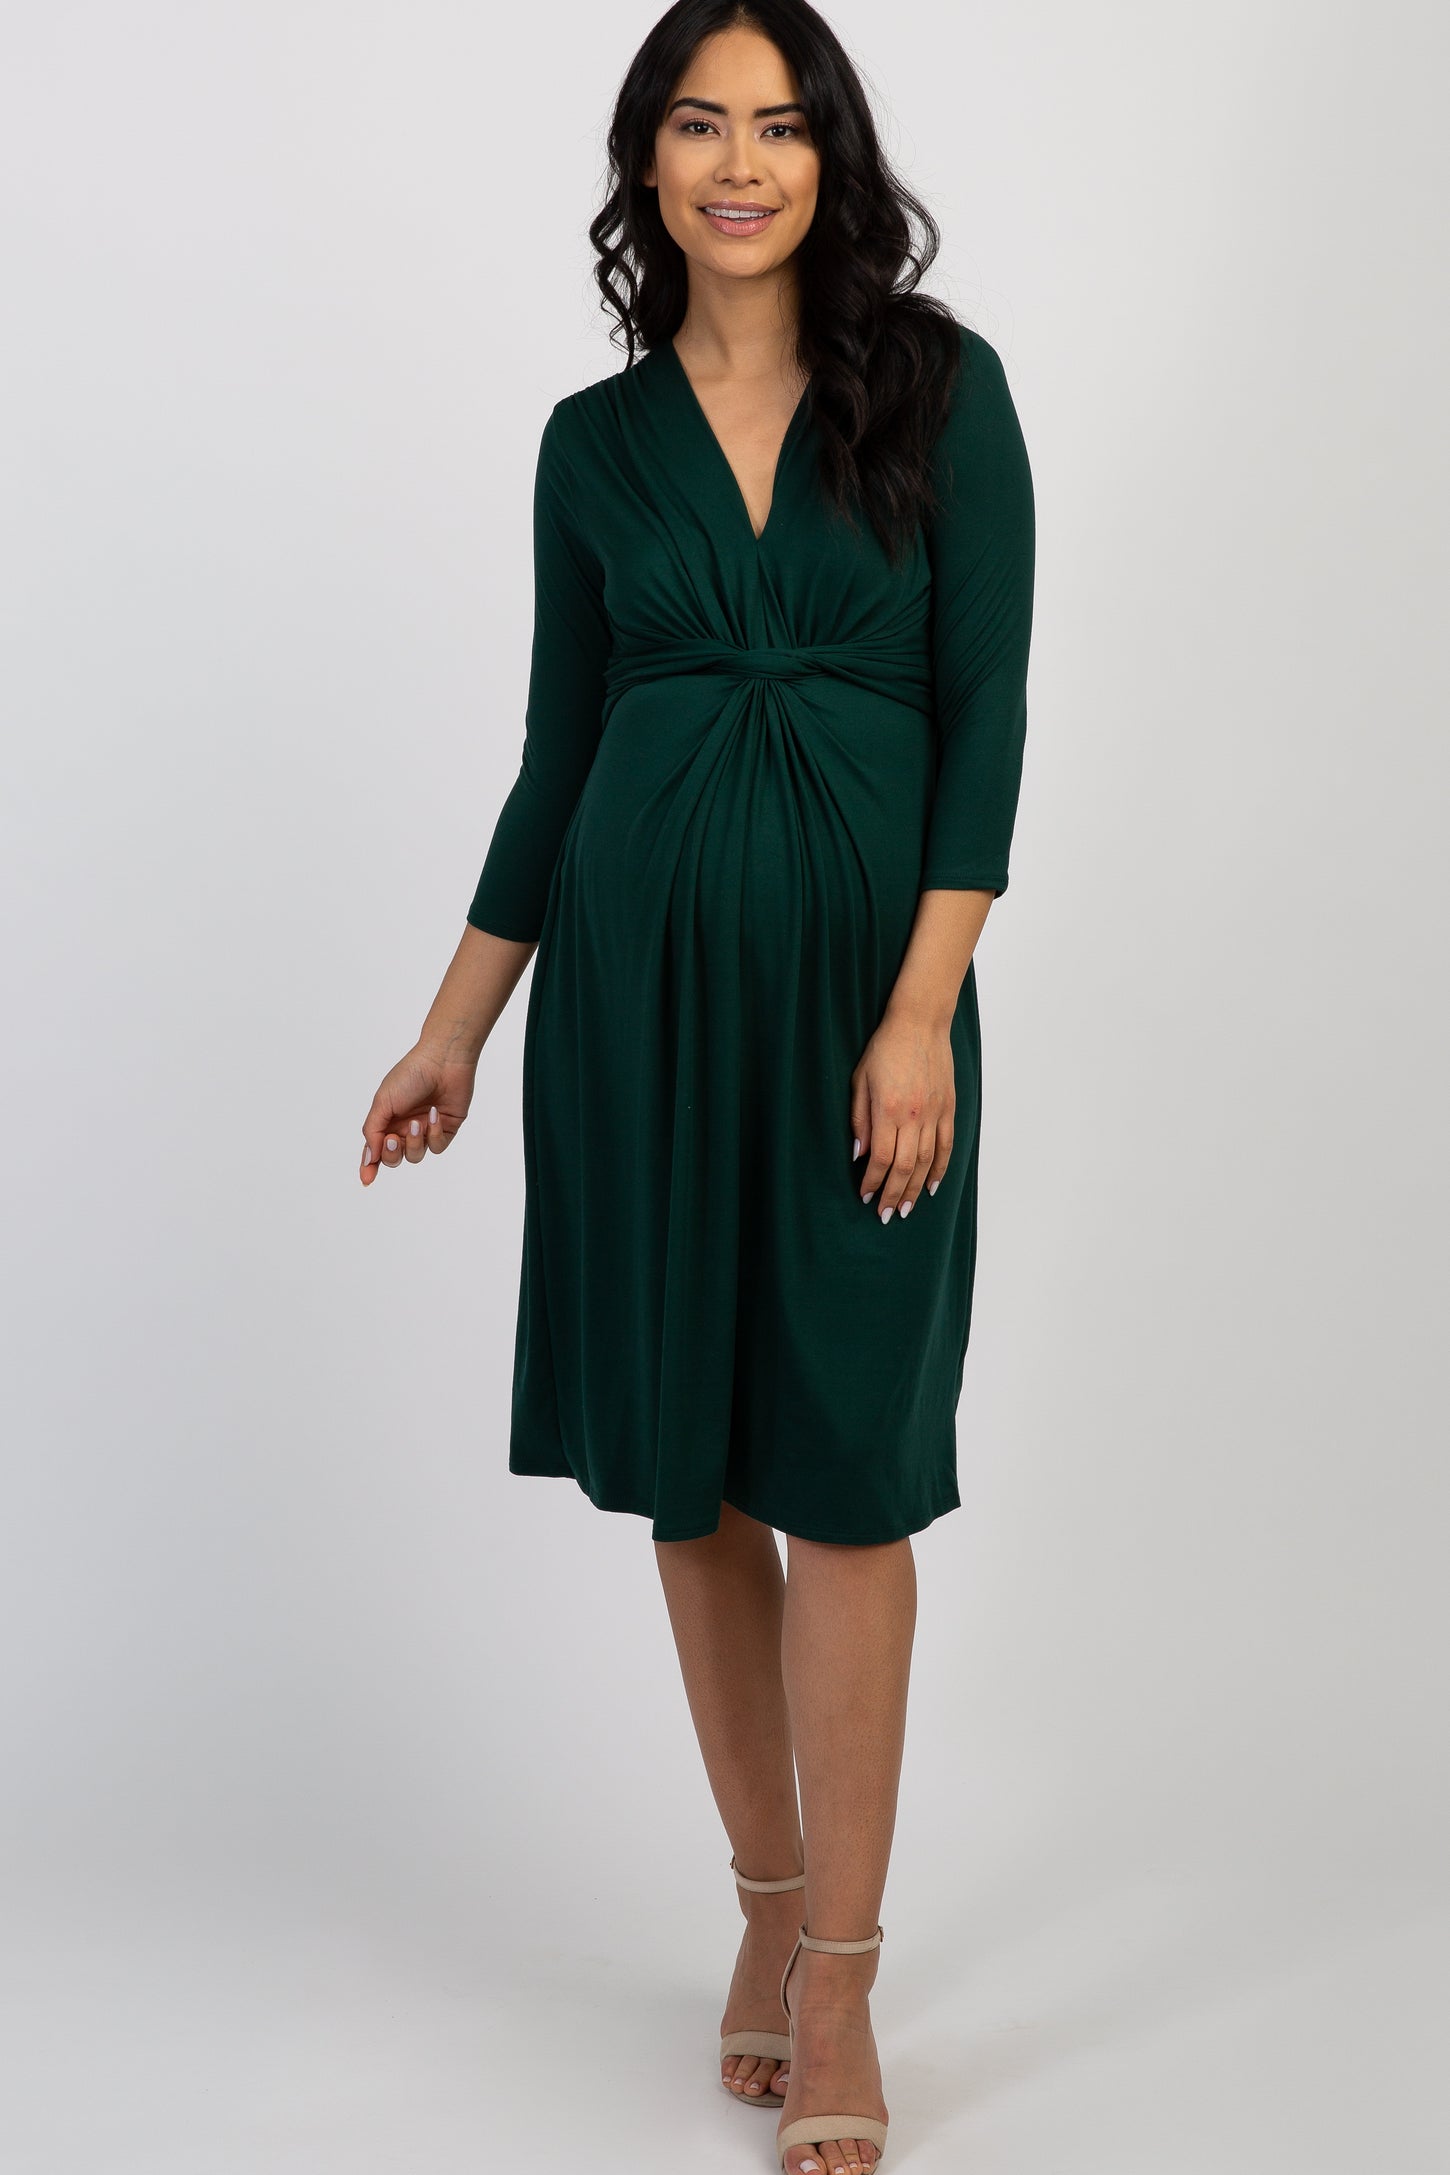 Forest Green Twist Front 3/4 Sleeve Maternity Dress– PinkBlush